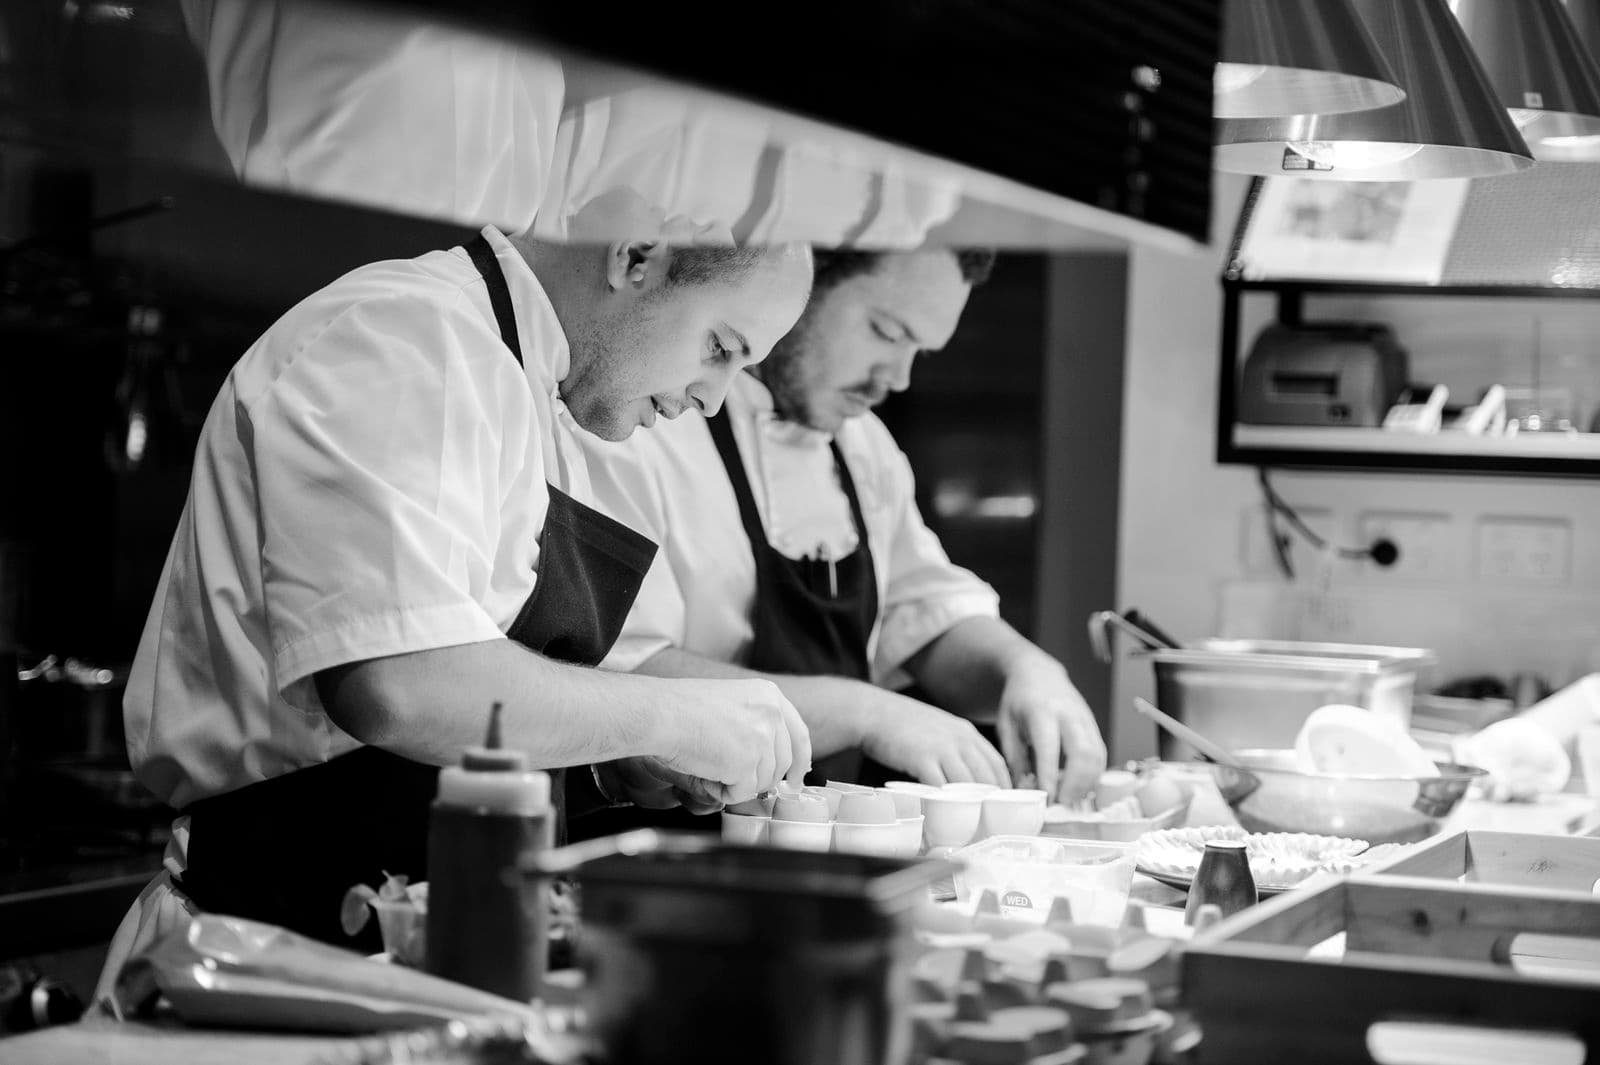 Two chefs in a kitchen preparing food